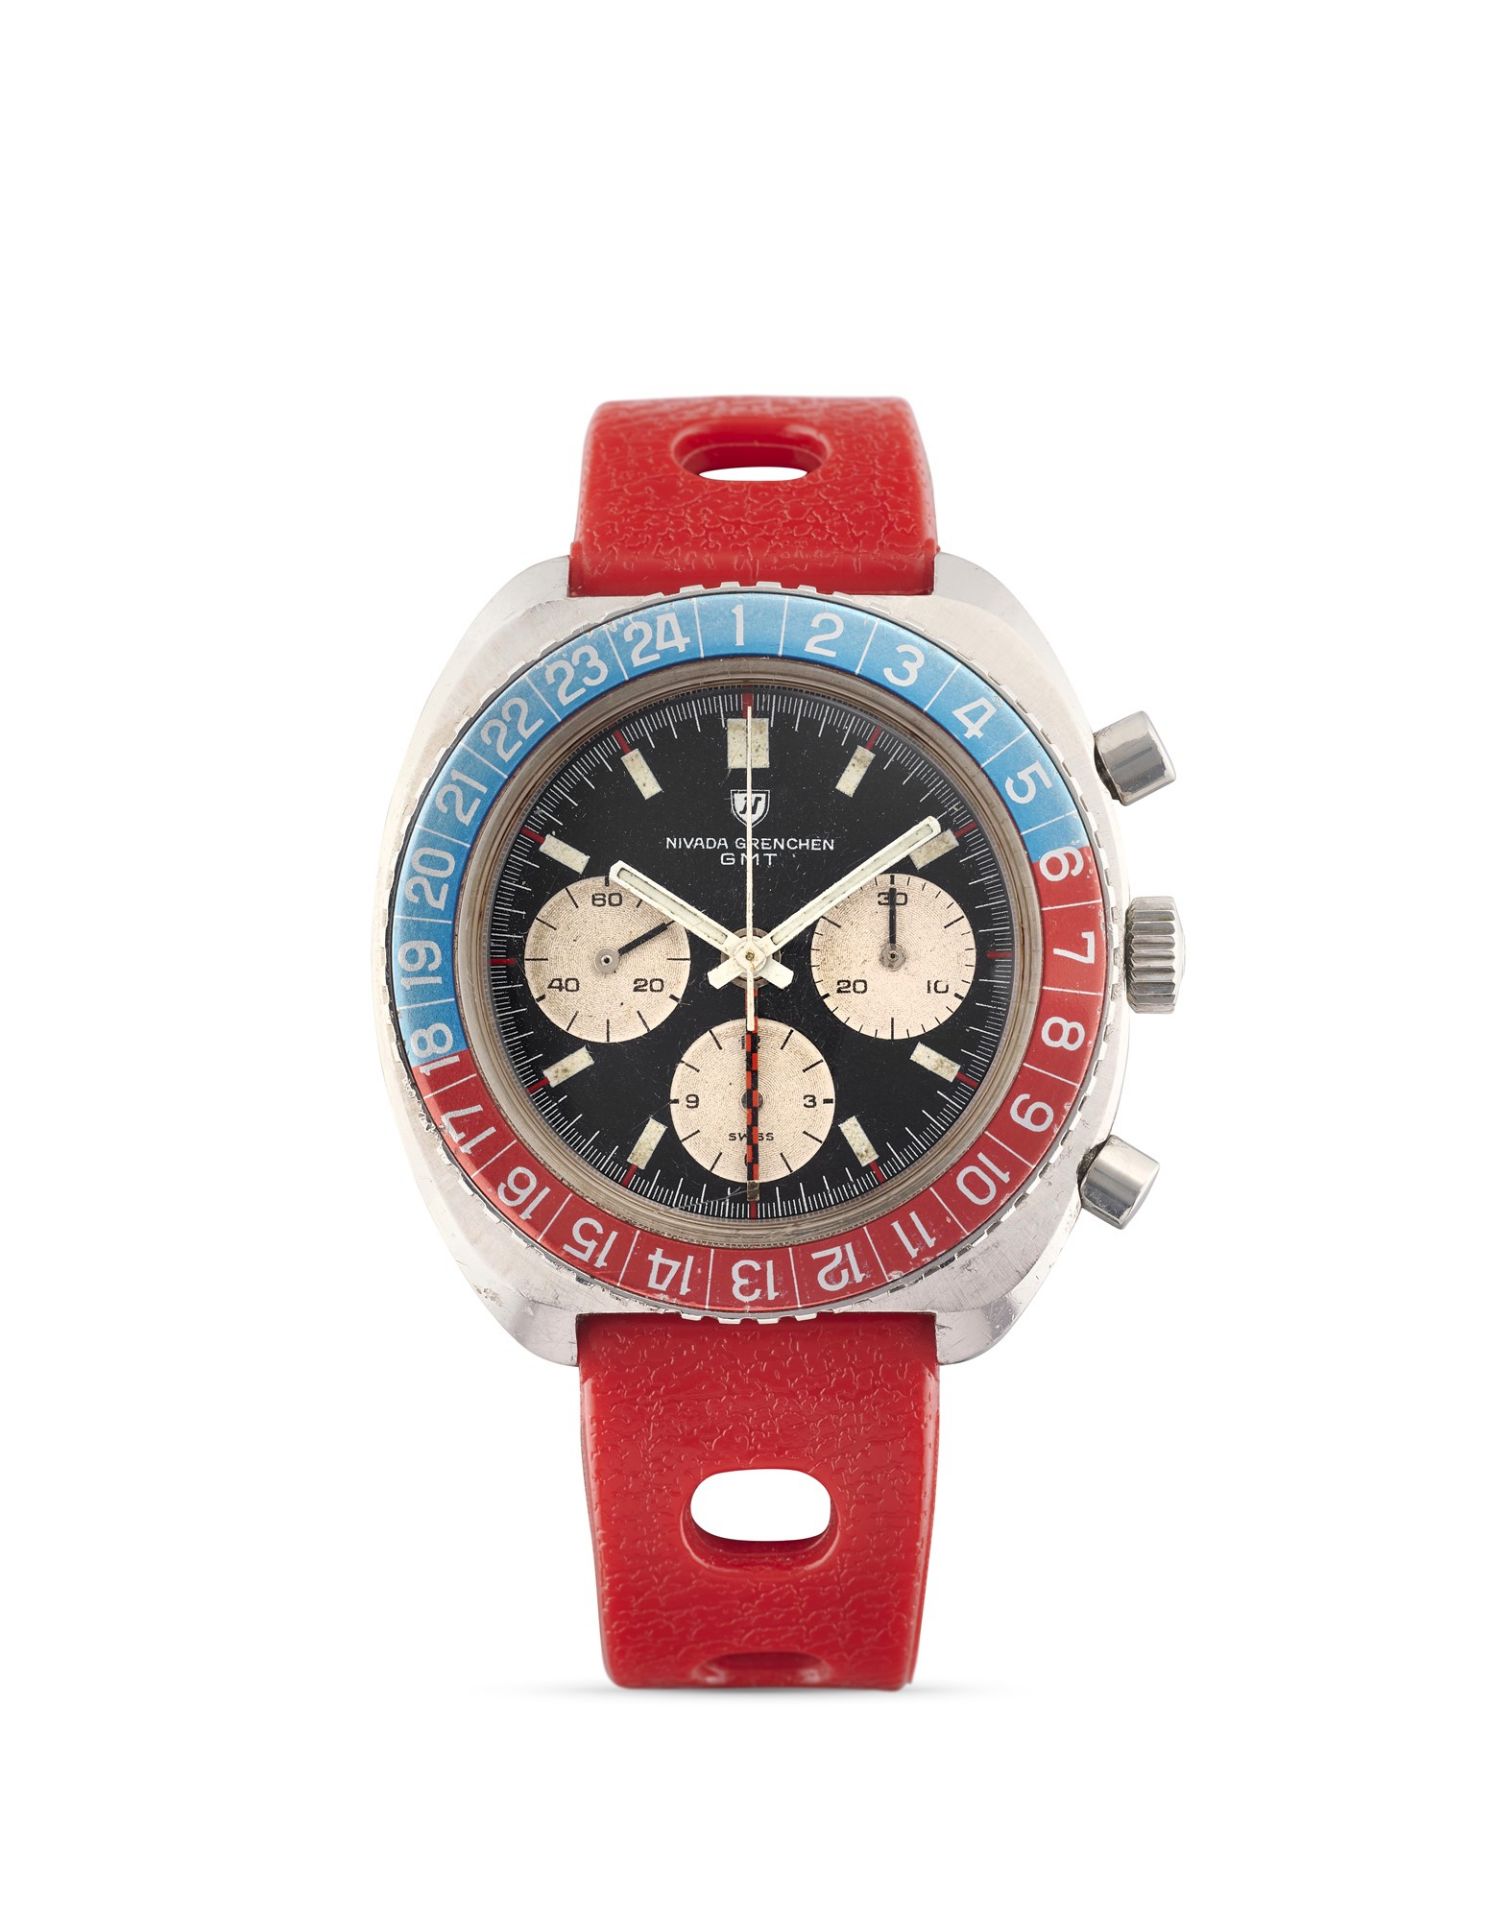 Nivada Grenchen chronograph-GMT 85009, 70s